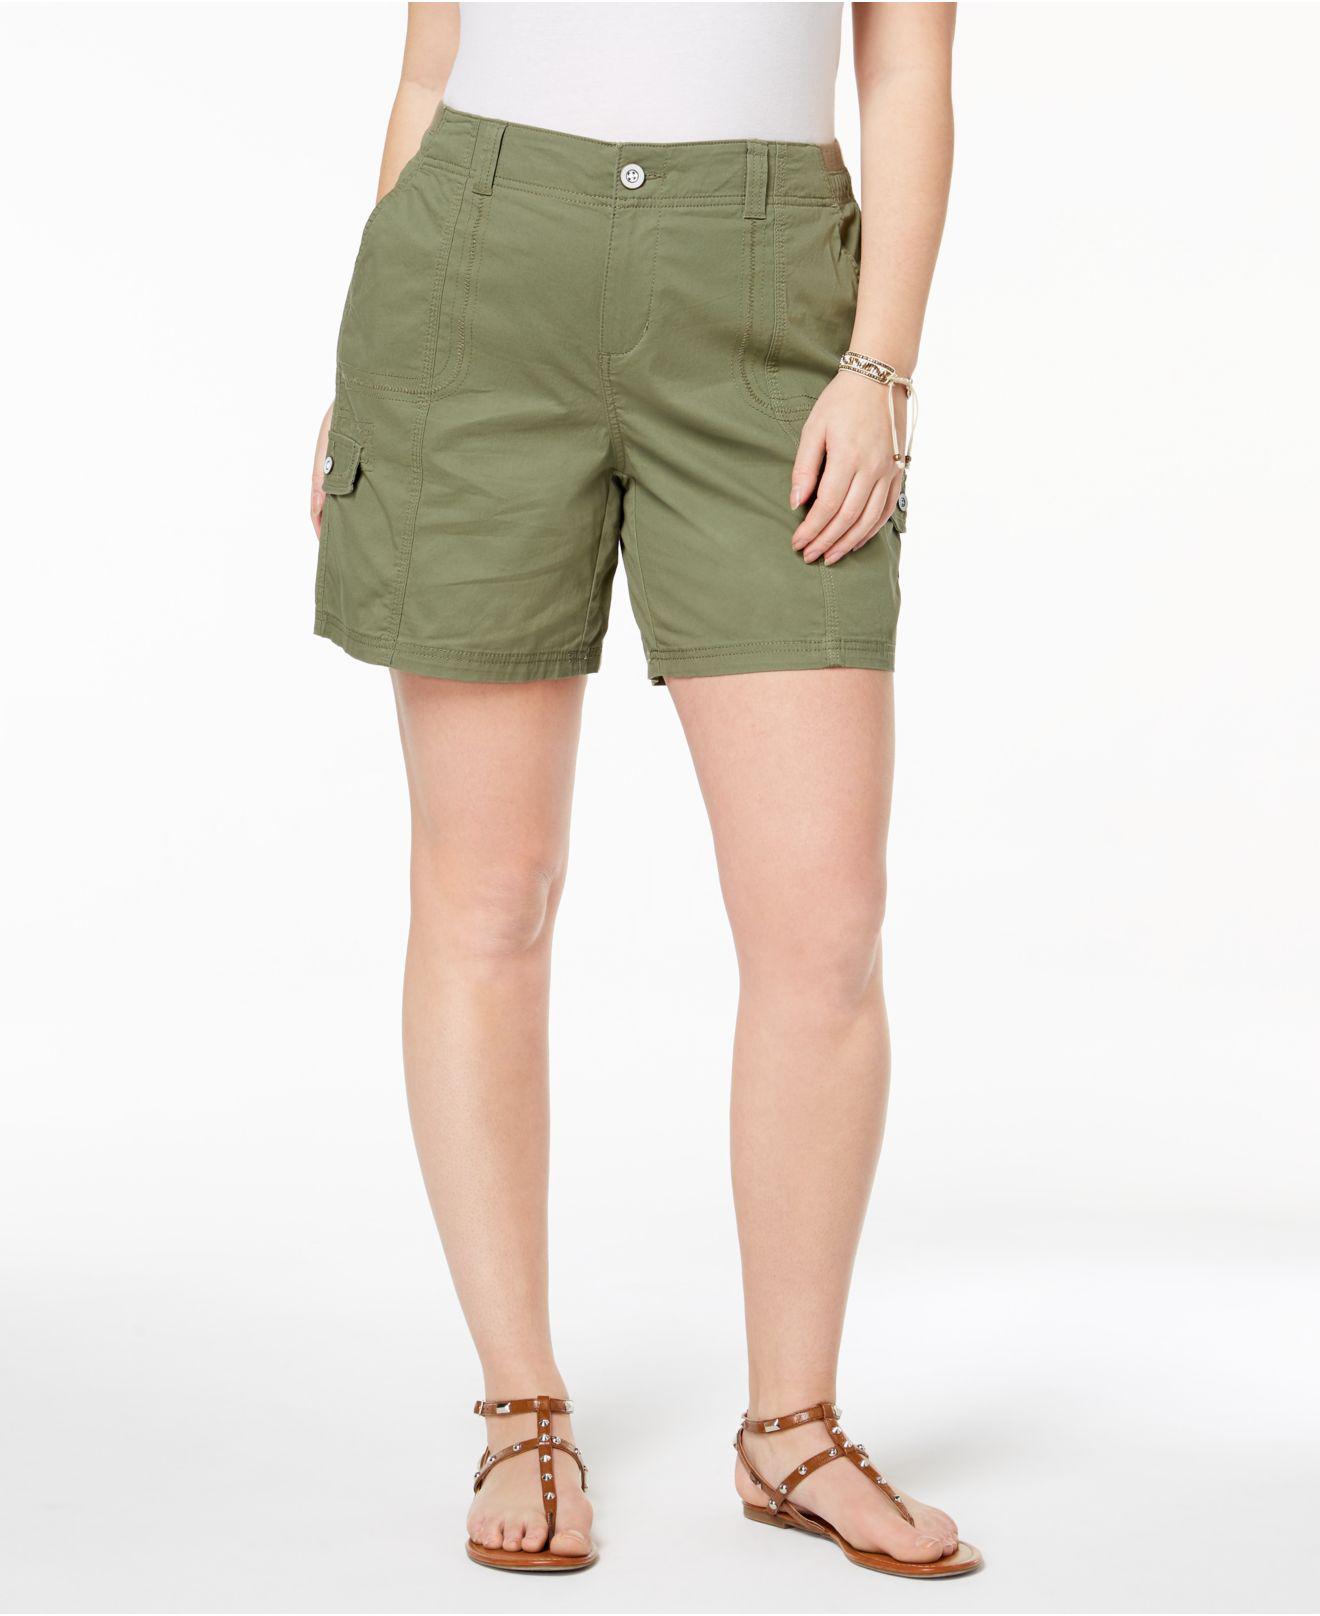 Style & Co. Cotton Plus Size Cargo Shorts in Green - Lyst